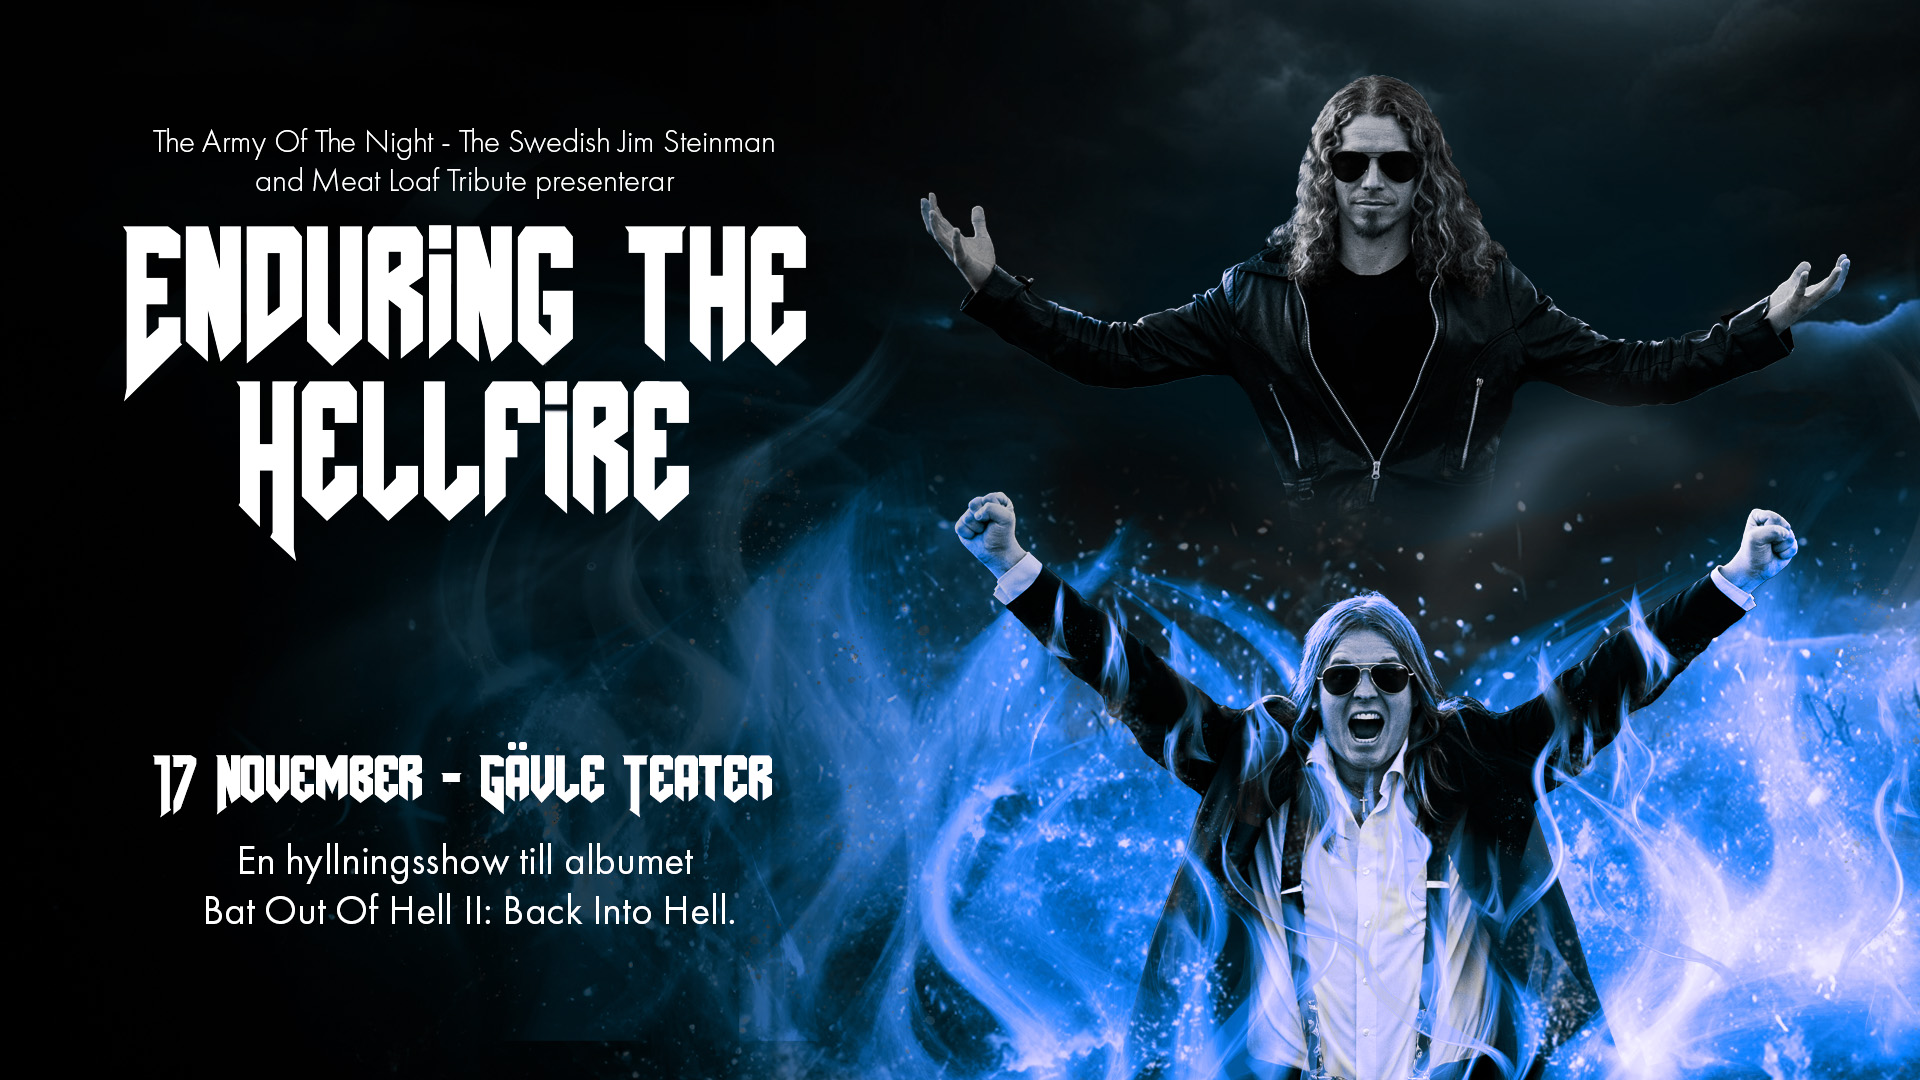 Enduring The Hellfire! Meat Loaf Tribute